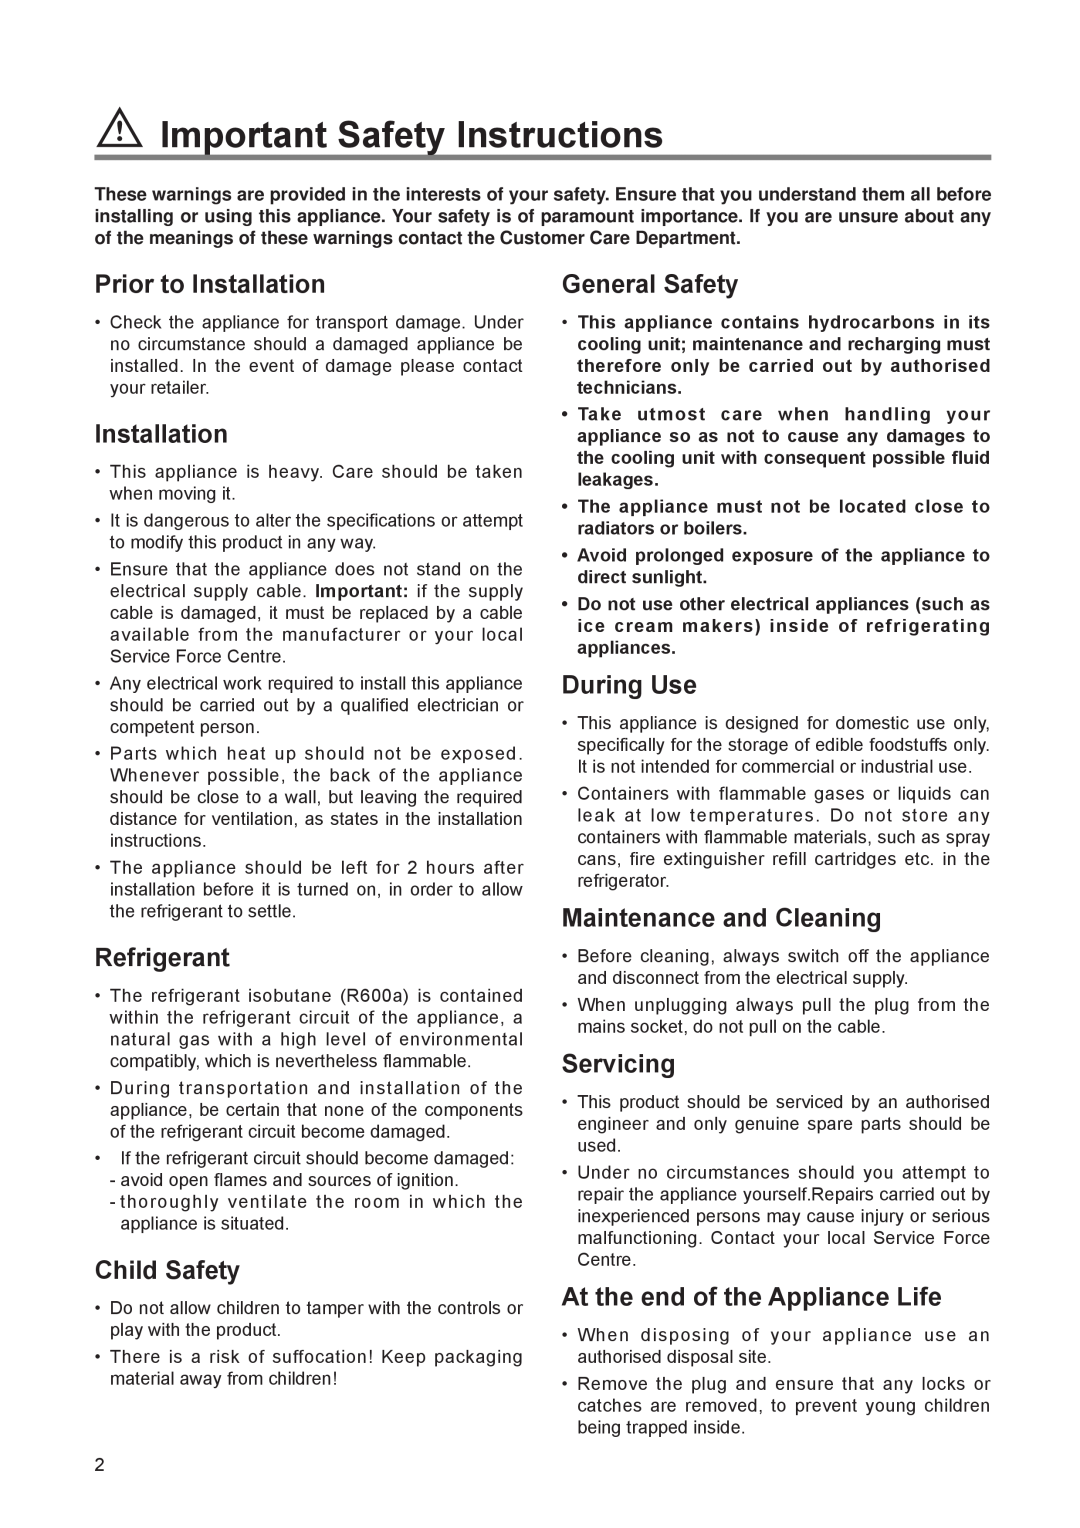 Zanussi ZEL 160 W manual Important Safety Instructions, Prior to Installation, Refrigerant, Child Safety, General Safety 